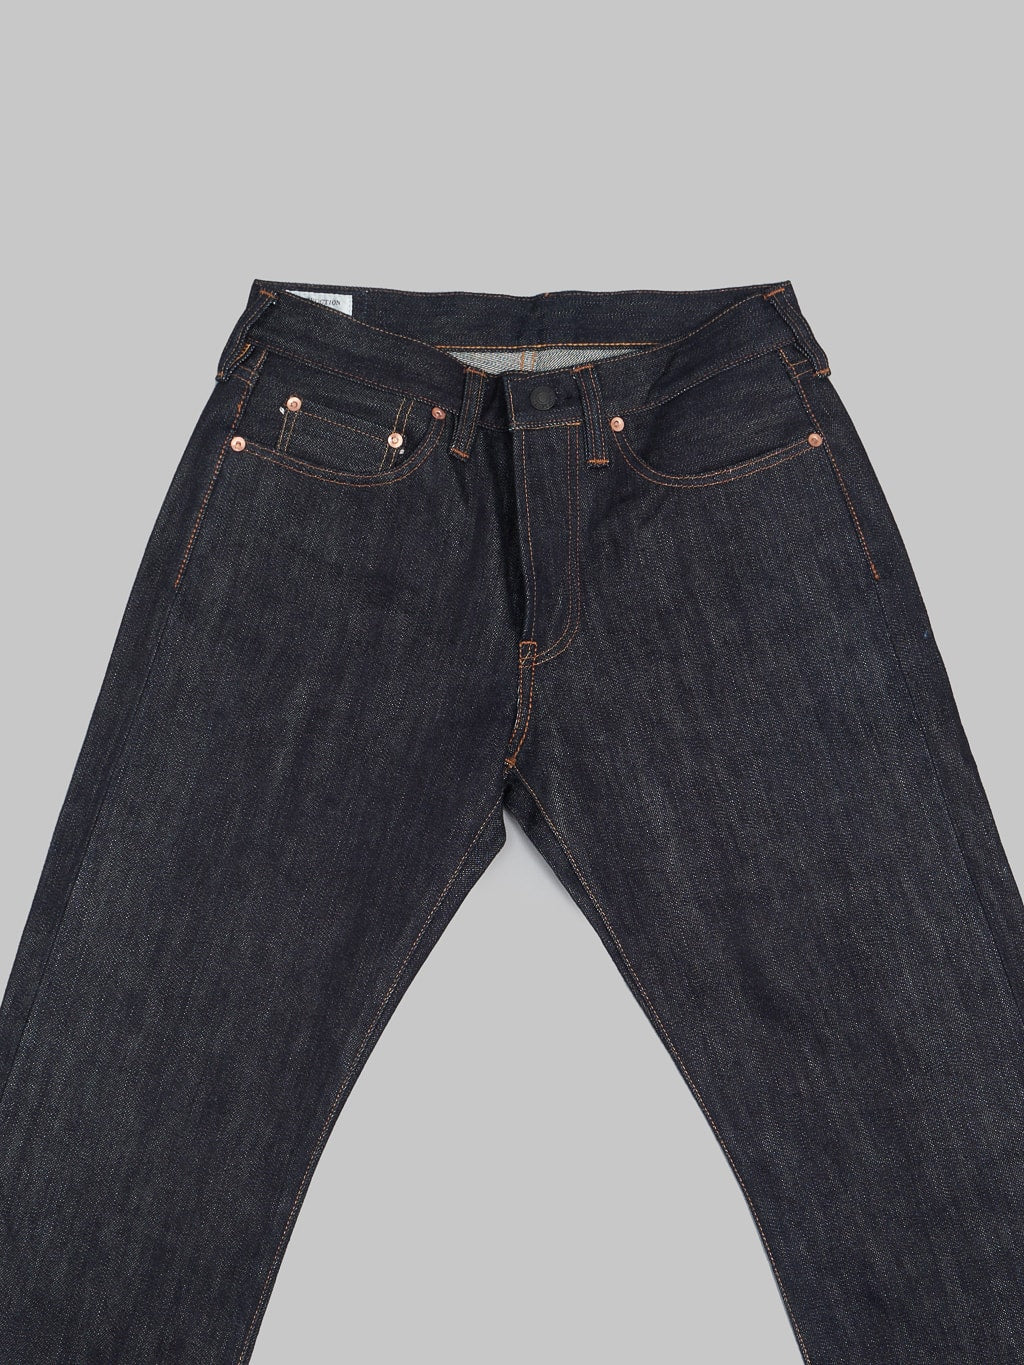 Studio dartisan suvin gold relaxed tapered jeans front view